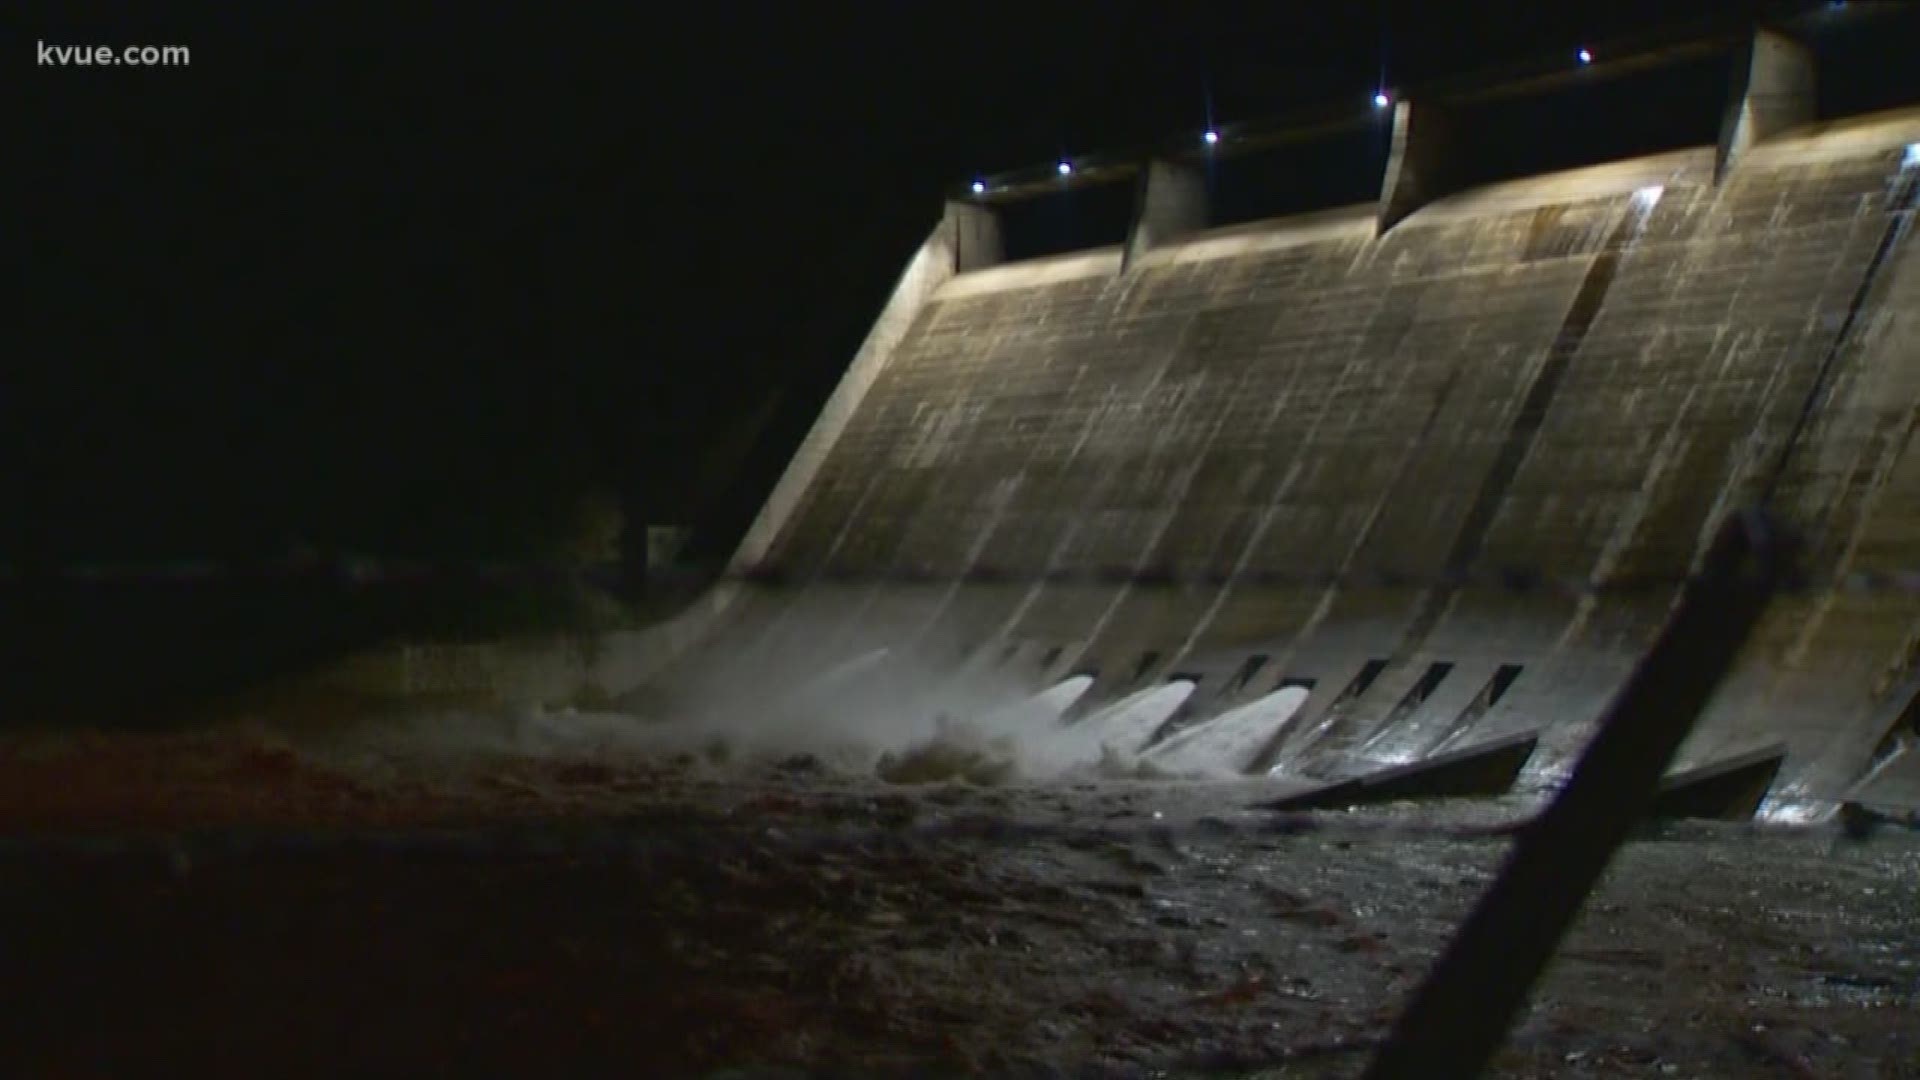 Austin Water is urging people to reduce water usage as it cleans treatment facilities dirtied by floodwaters.